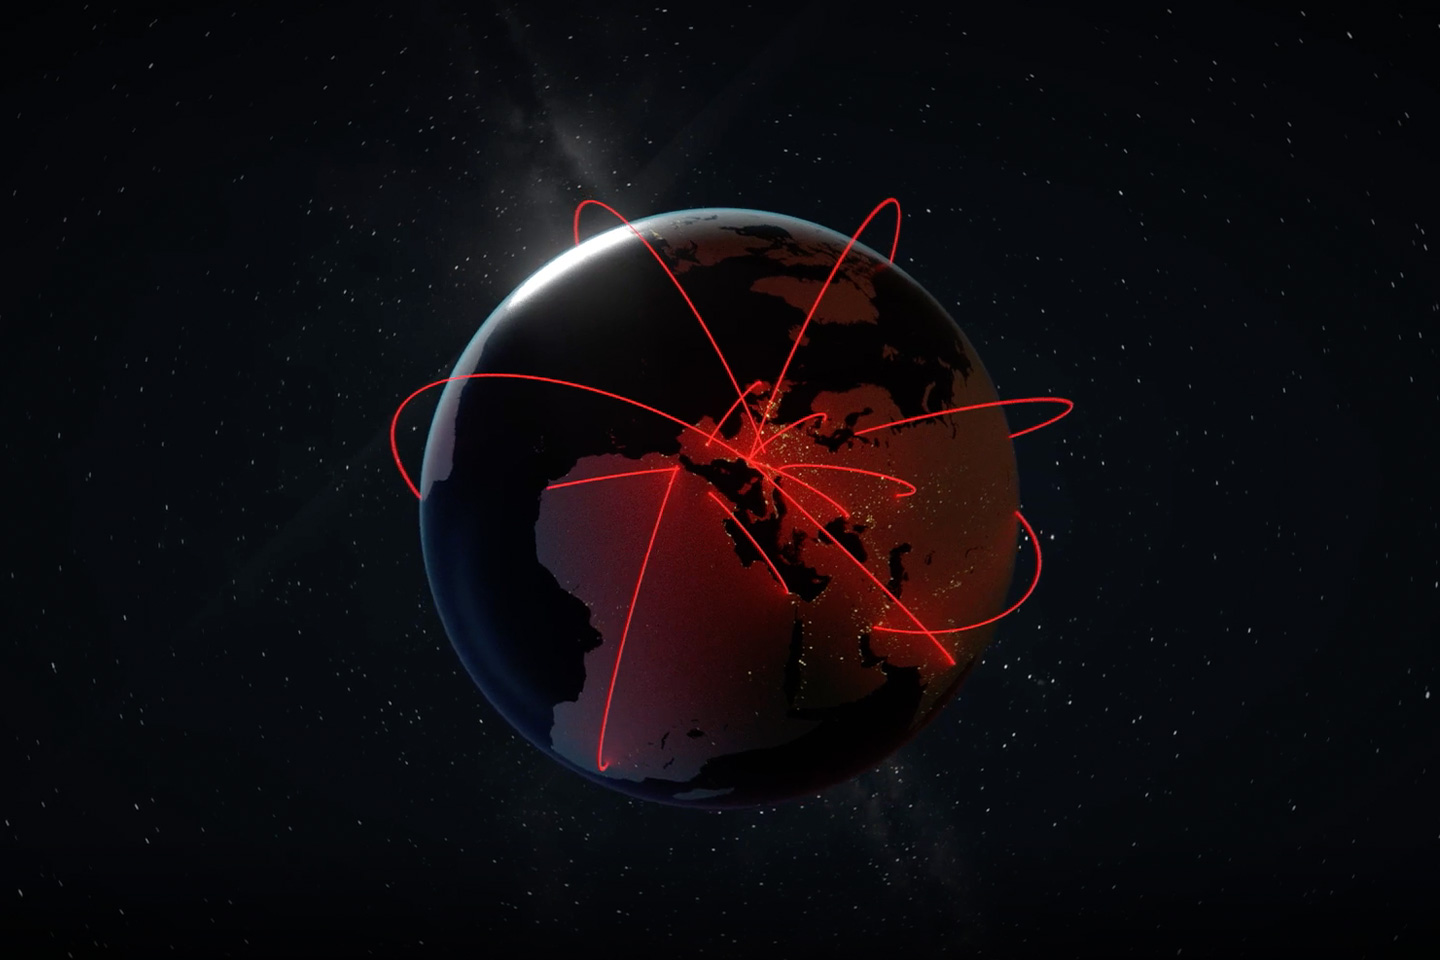 cyber attacks, represented by bright red lines crisscrossing the globe from a centralized region